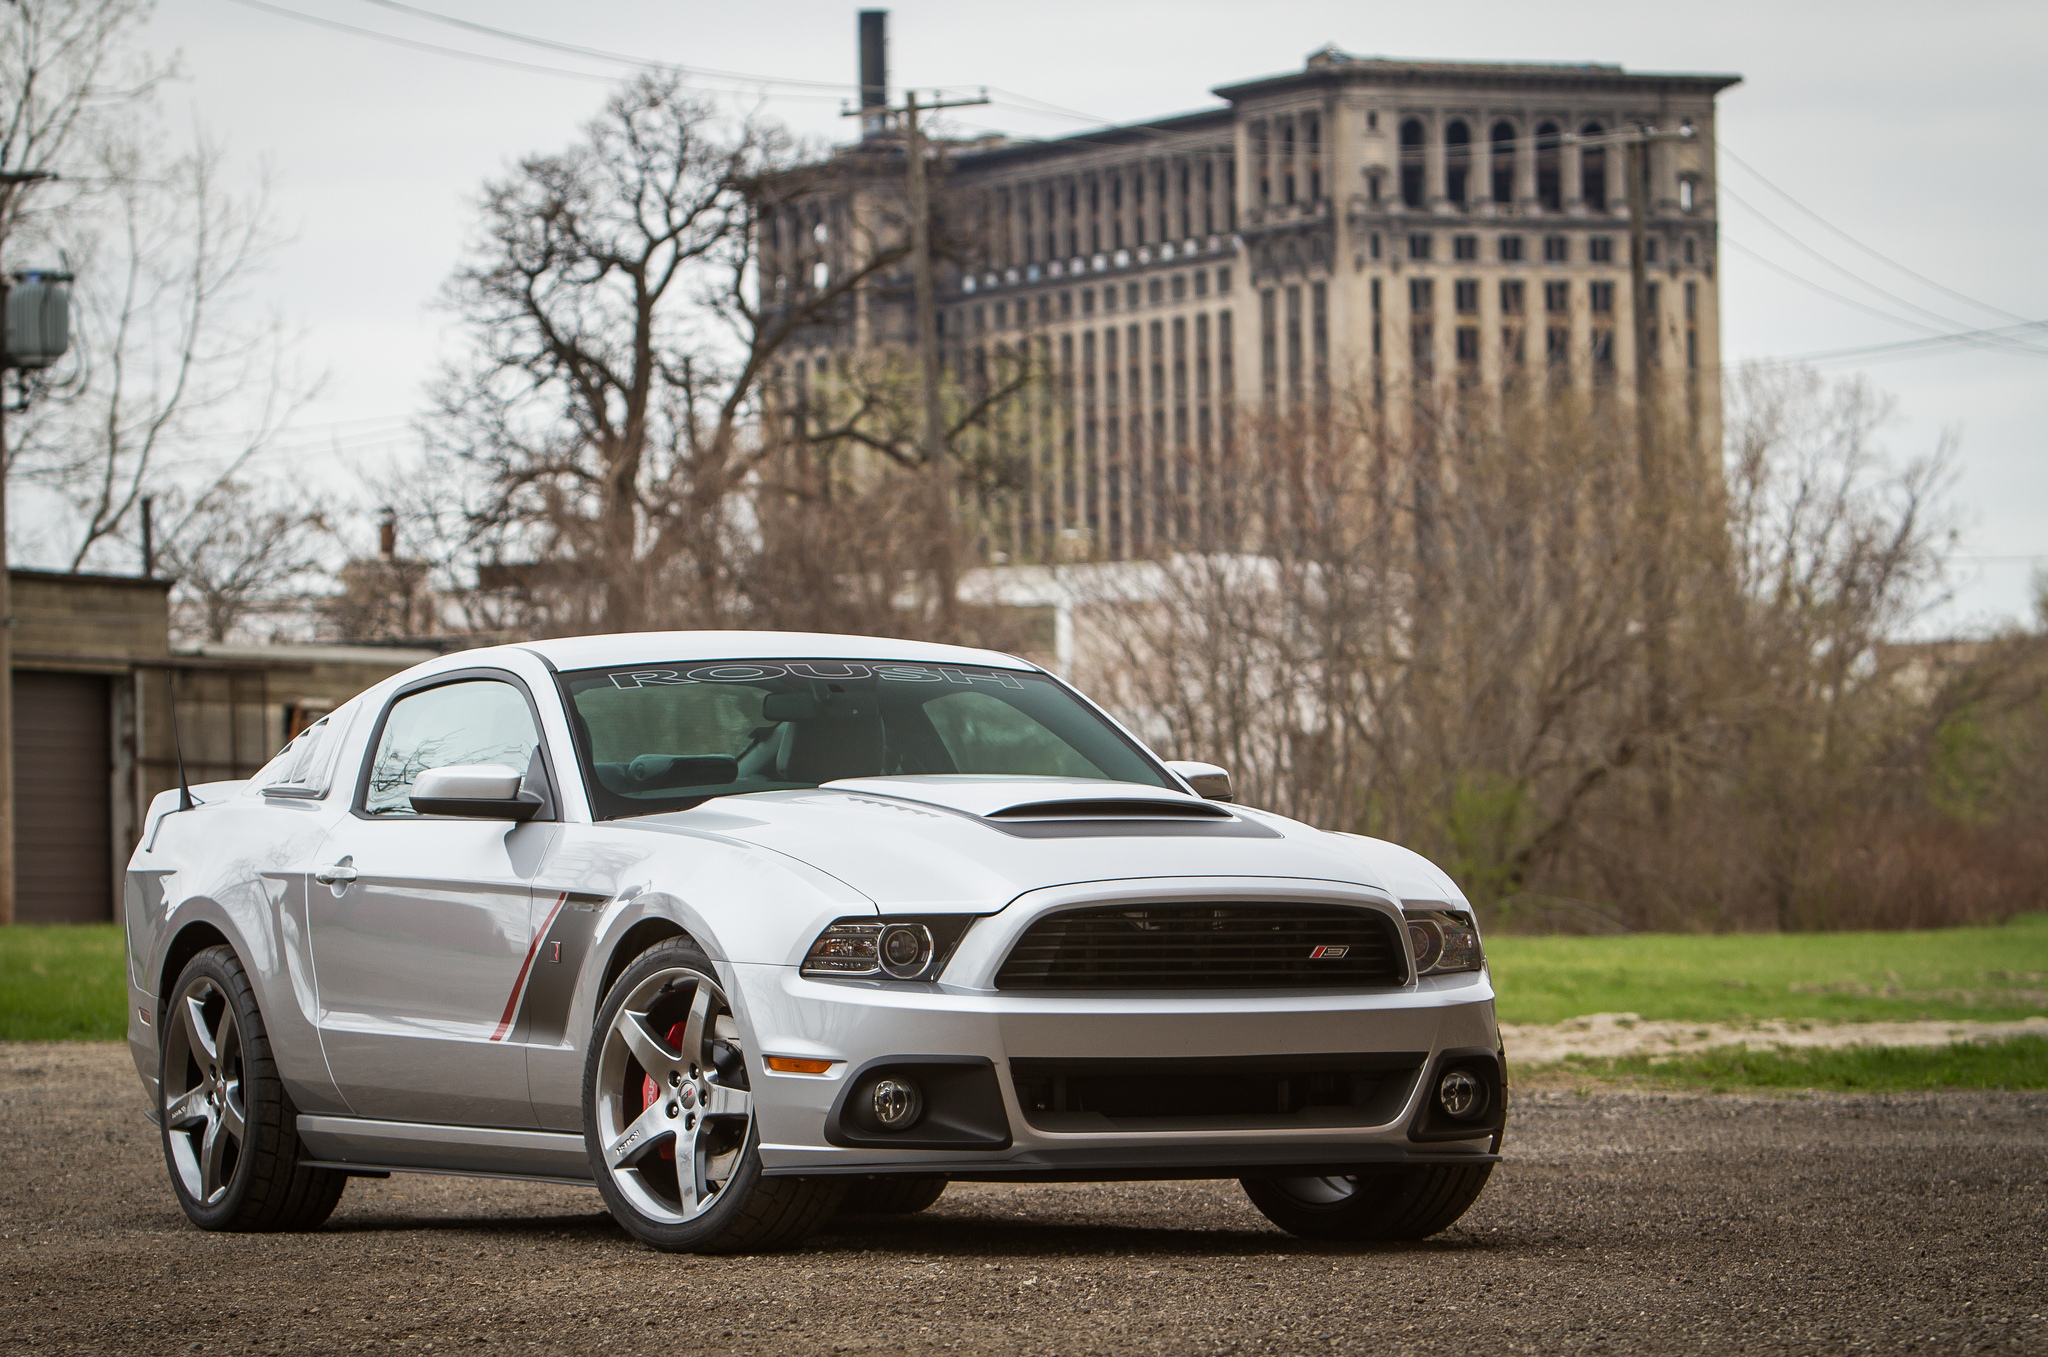 2013, Roush, Ford, Mustang, Muscle, Cars Wallpaper